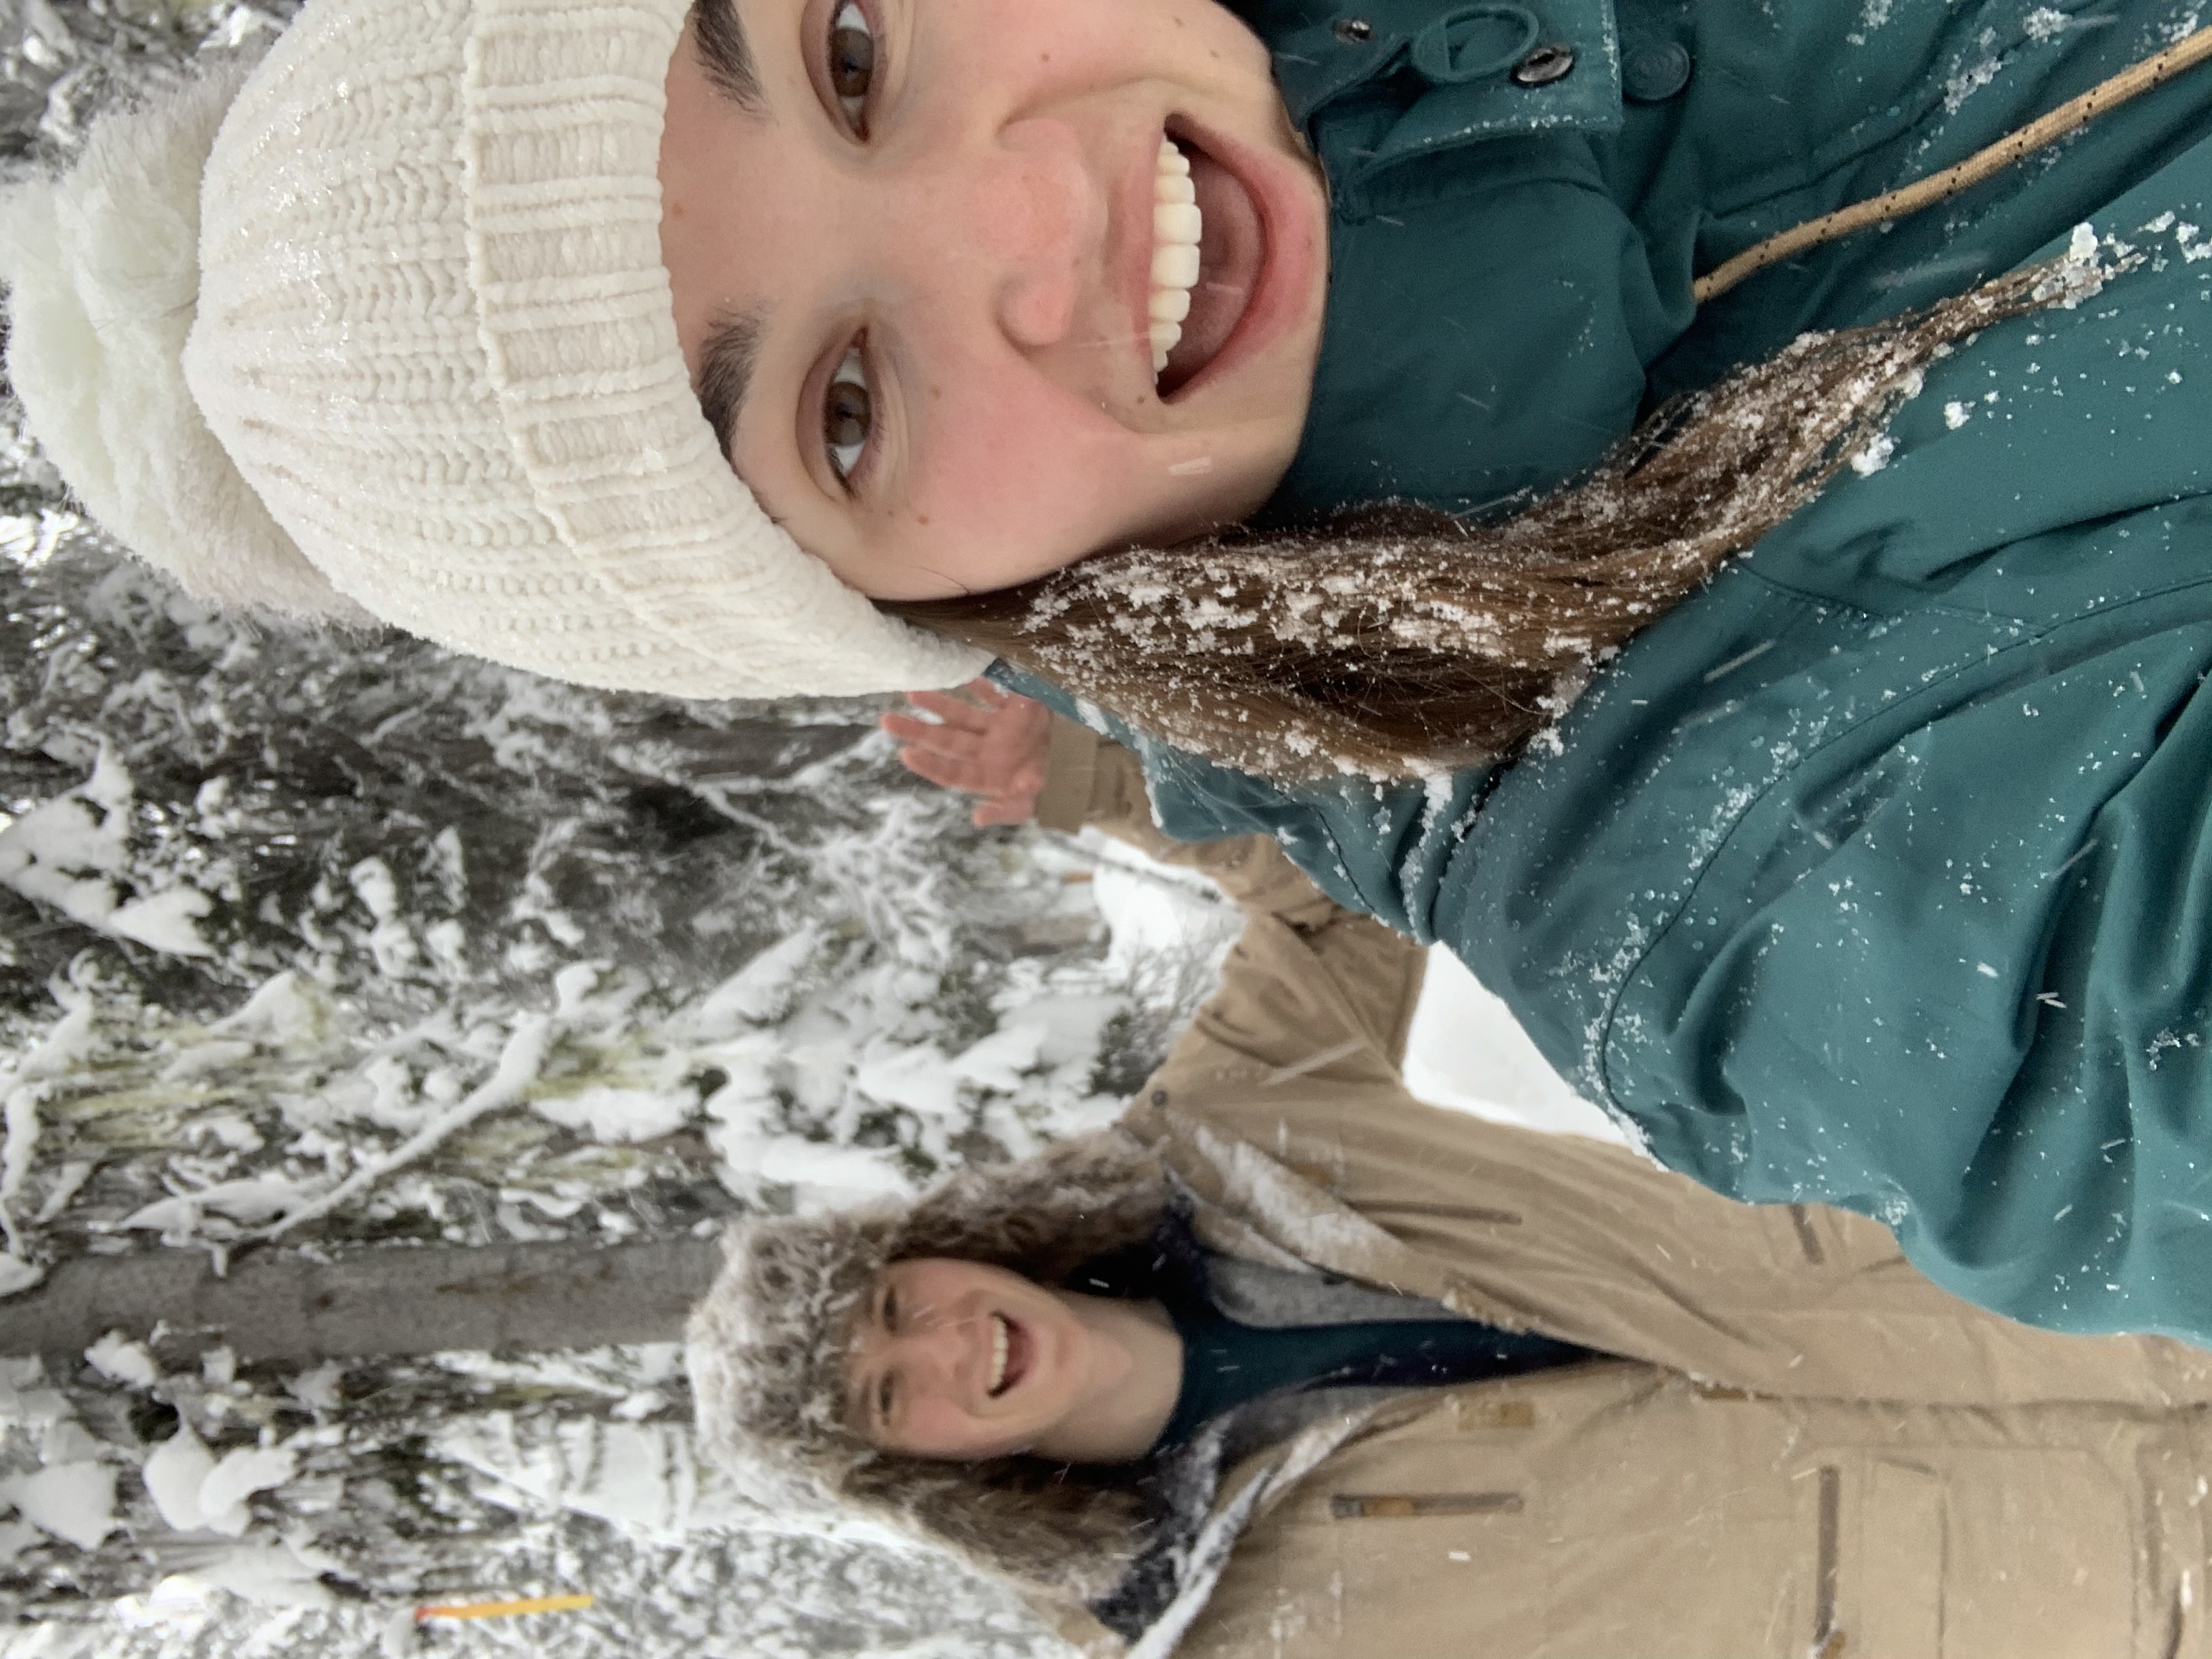 Two people wearing winter hats and jackets pose for a selfie photo in a snowy forest.